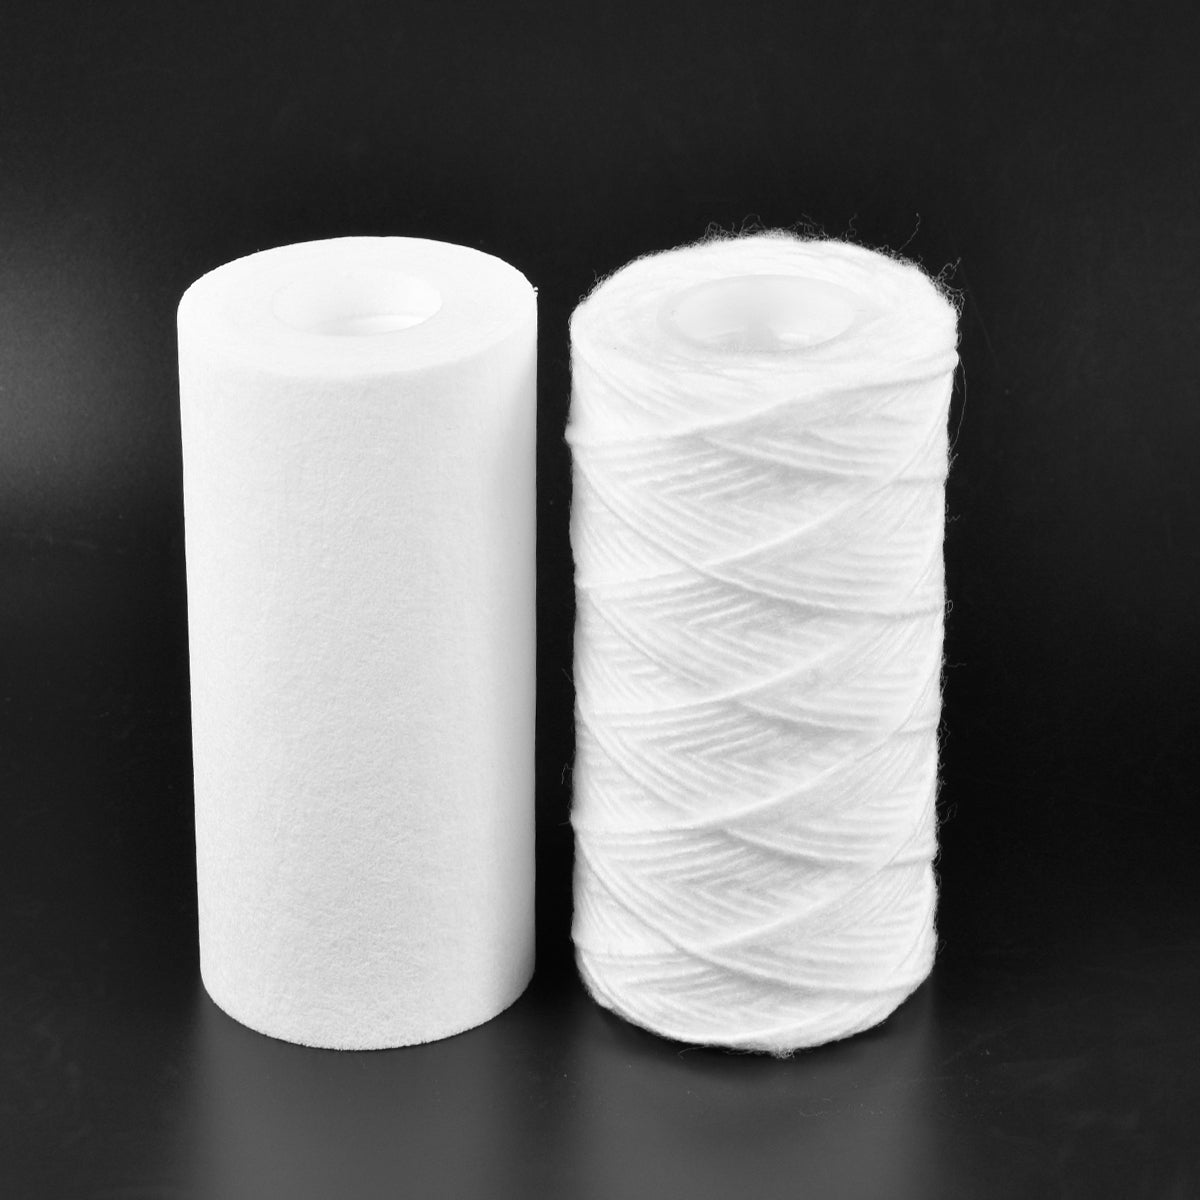 Filter Cartridge Water Purifier 5 / 10 Inch 5-Micron Sediment PP Cotton or Wire Wound For Water Chiller Water Filter System